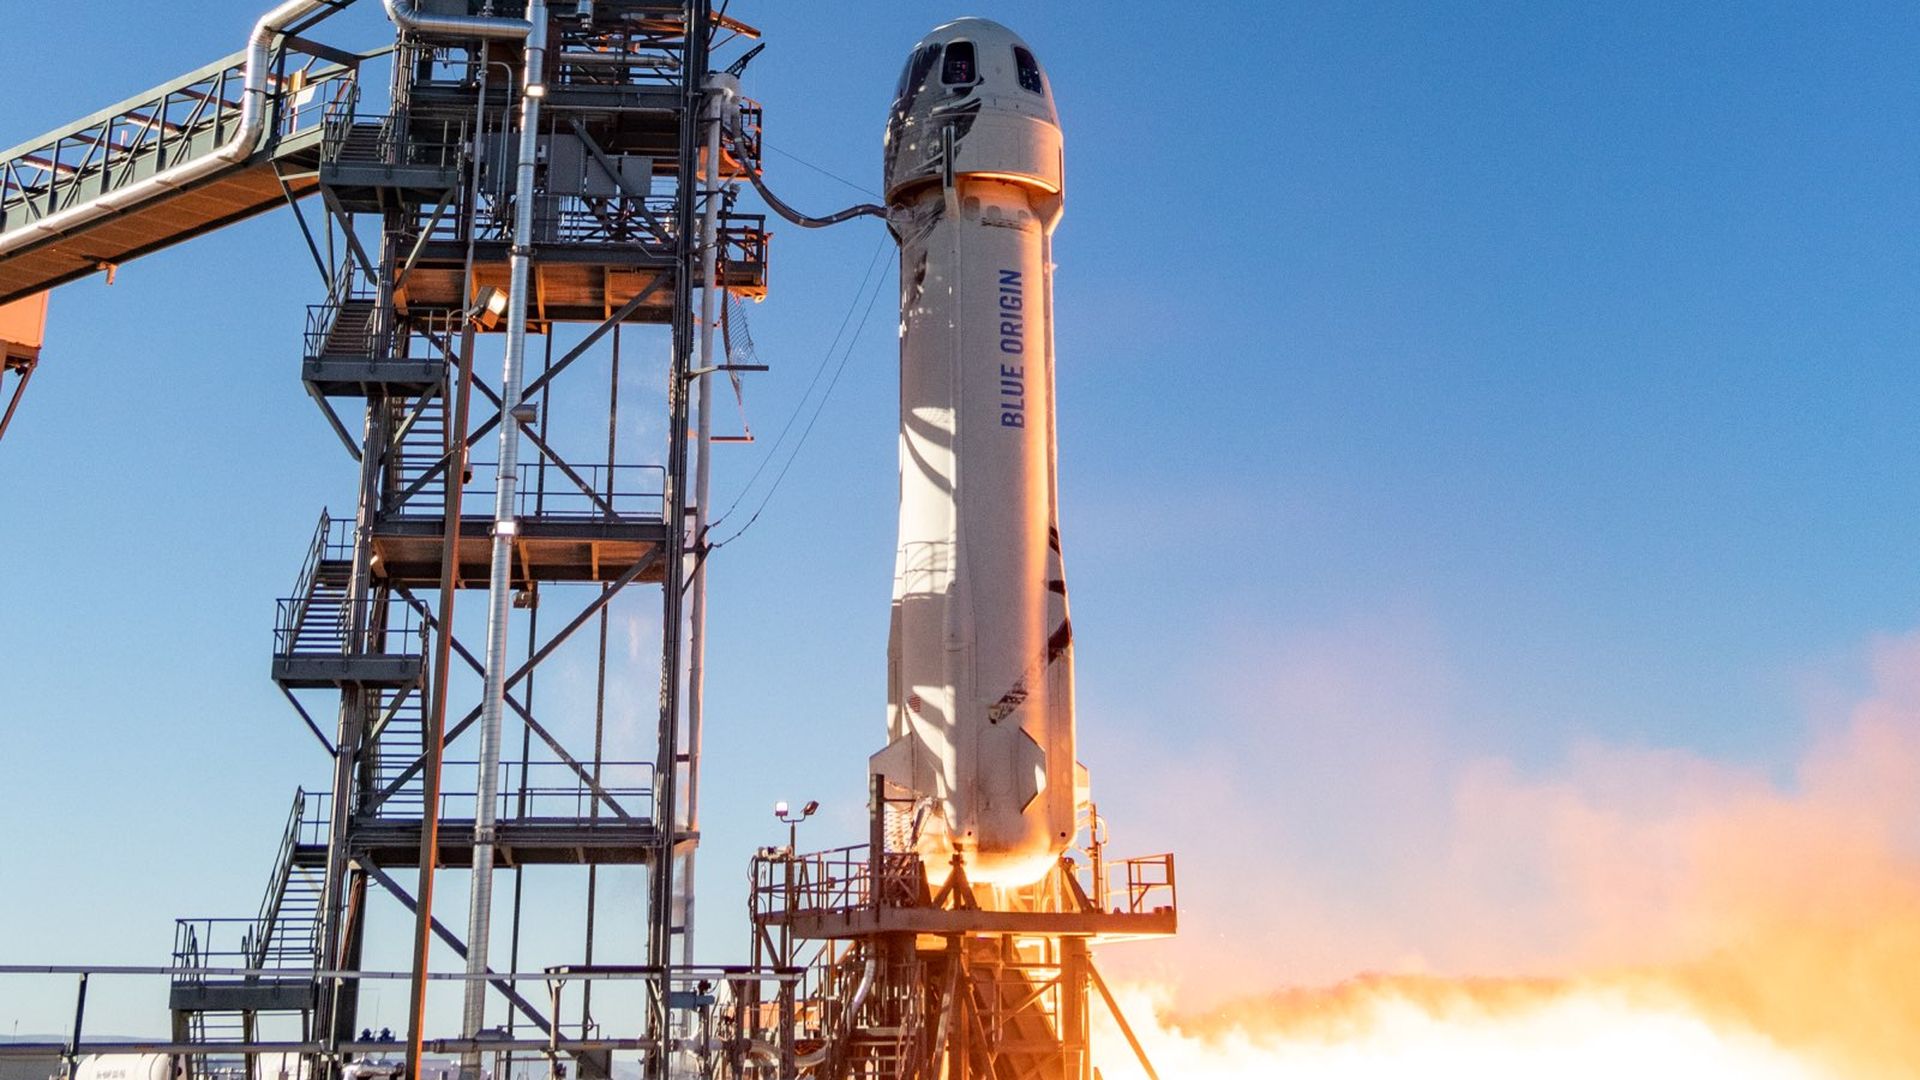 A rocket with engine started about to lift off from the pad